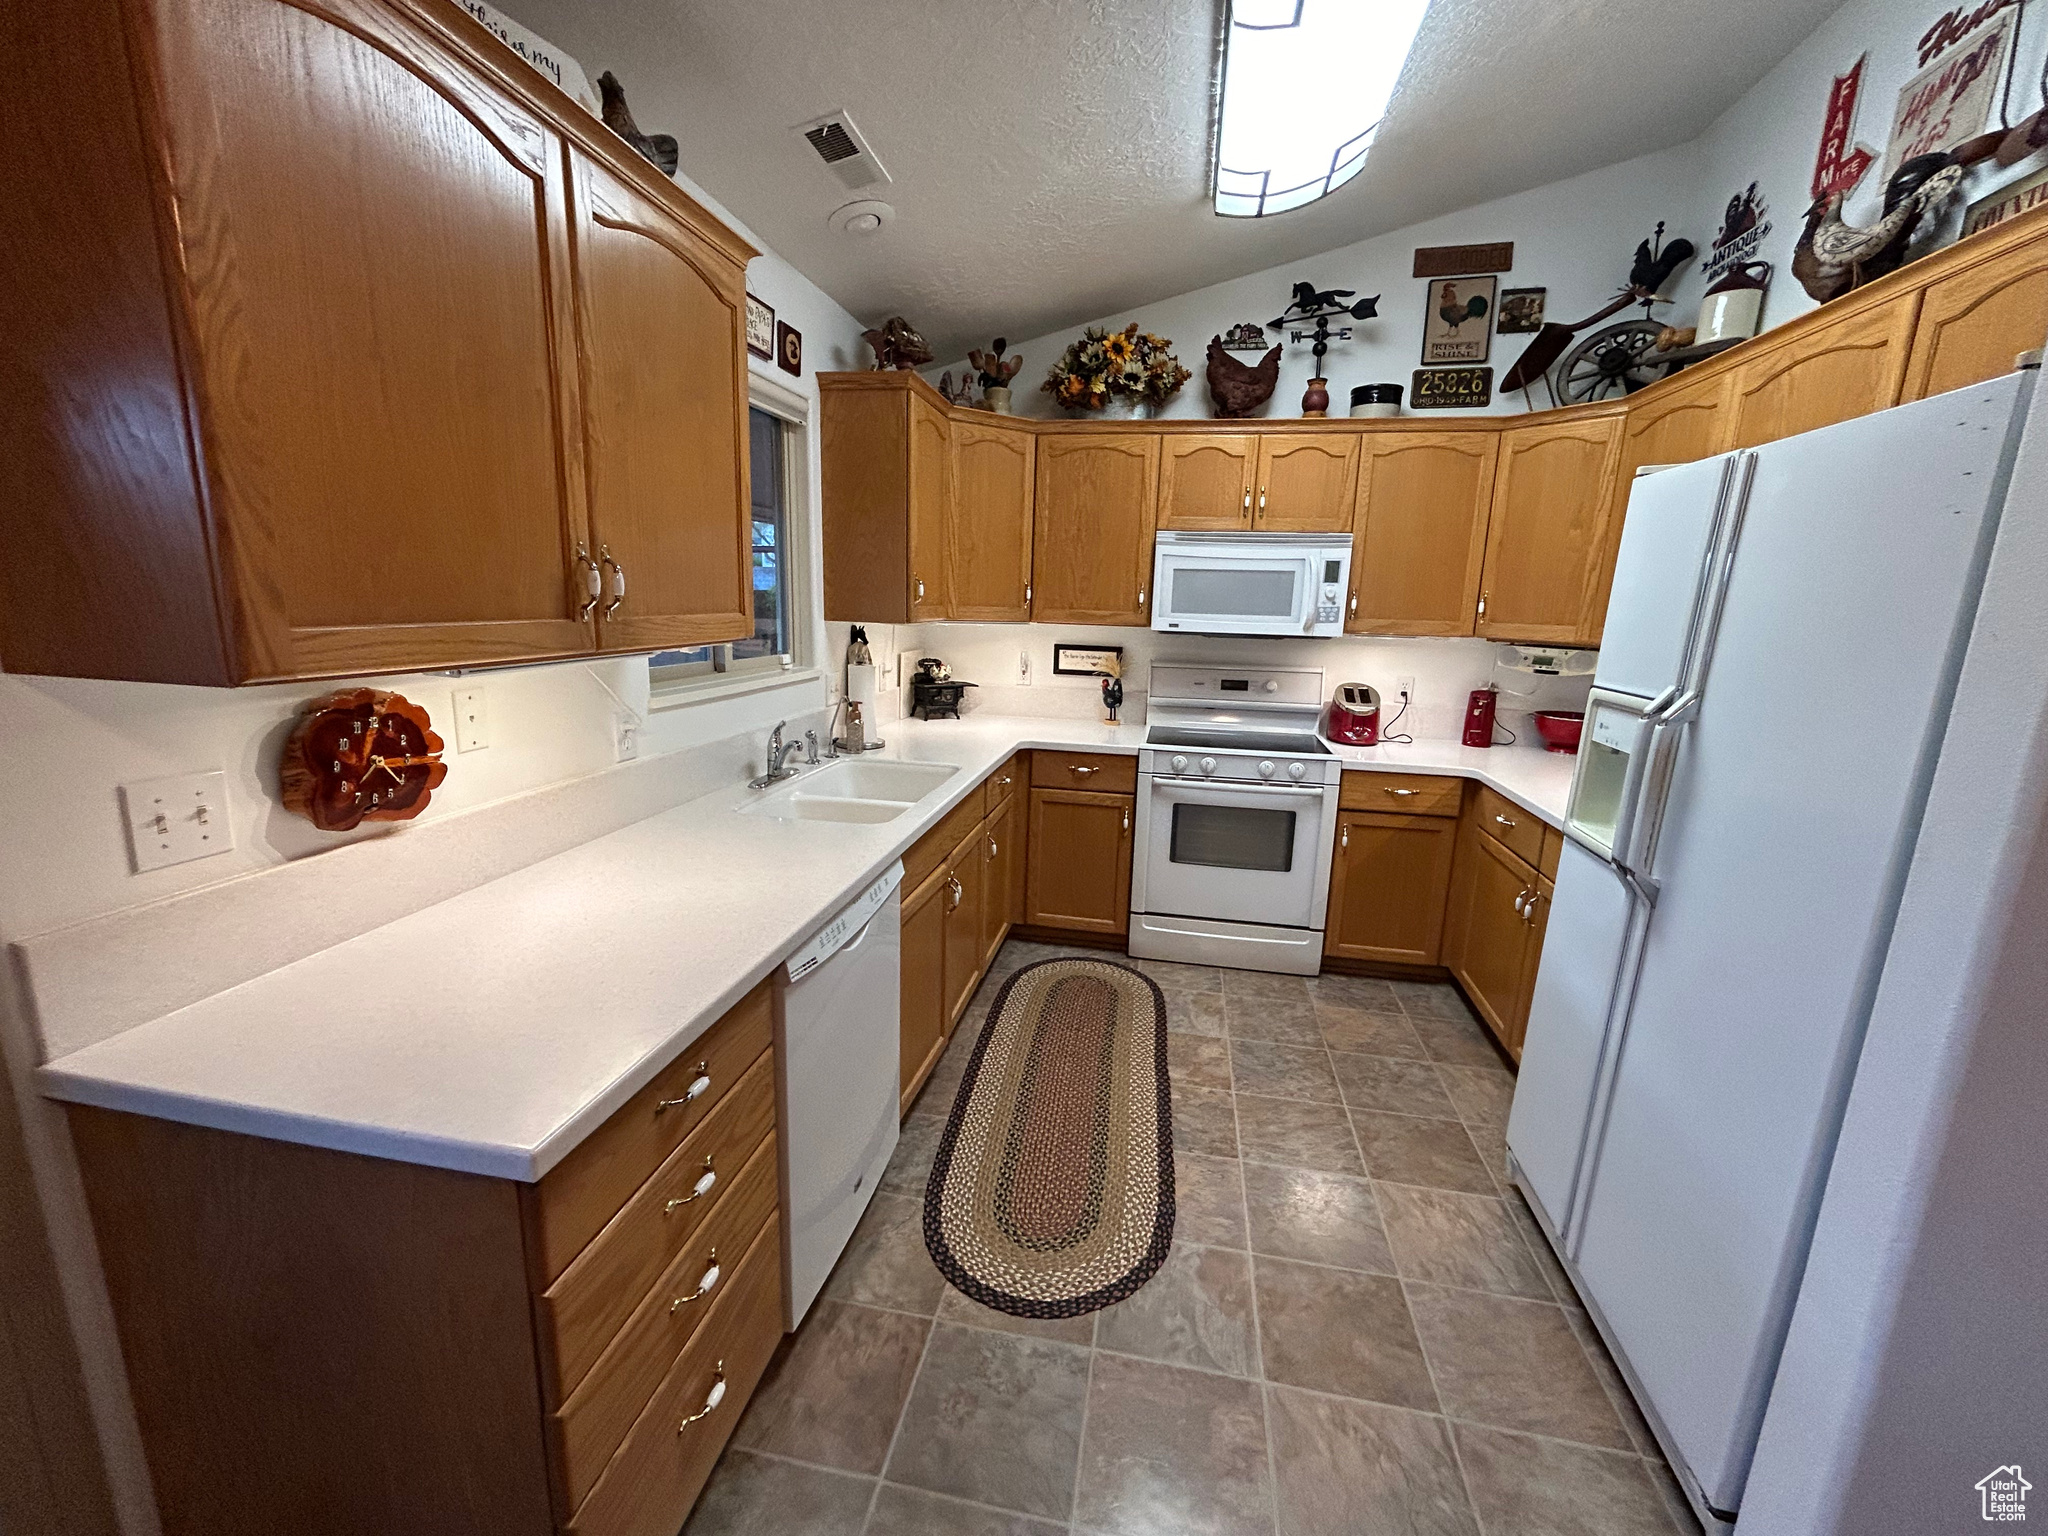 Kitchen featuring white appliances, vaulted ceiling, tile flooring, a textured ceiling, and sink